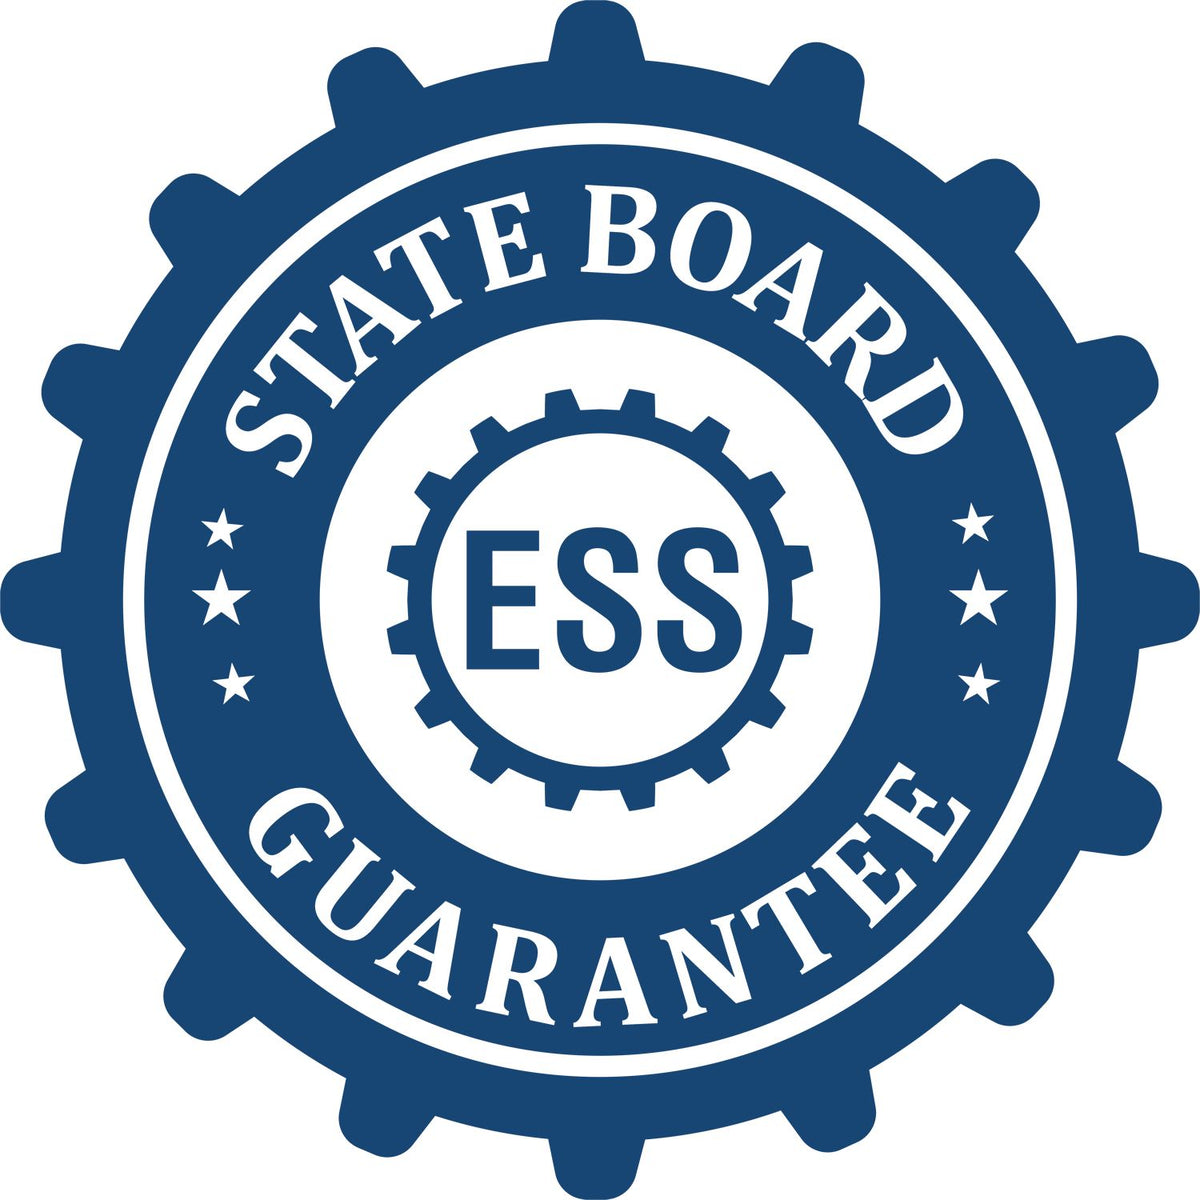 An emblem in a gear shape illustrating a state board guarantee for the Digital Colorado Geologist Stamp, Electronic Seal for Colorado Geologist